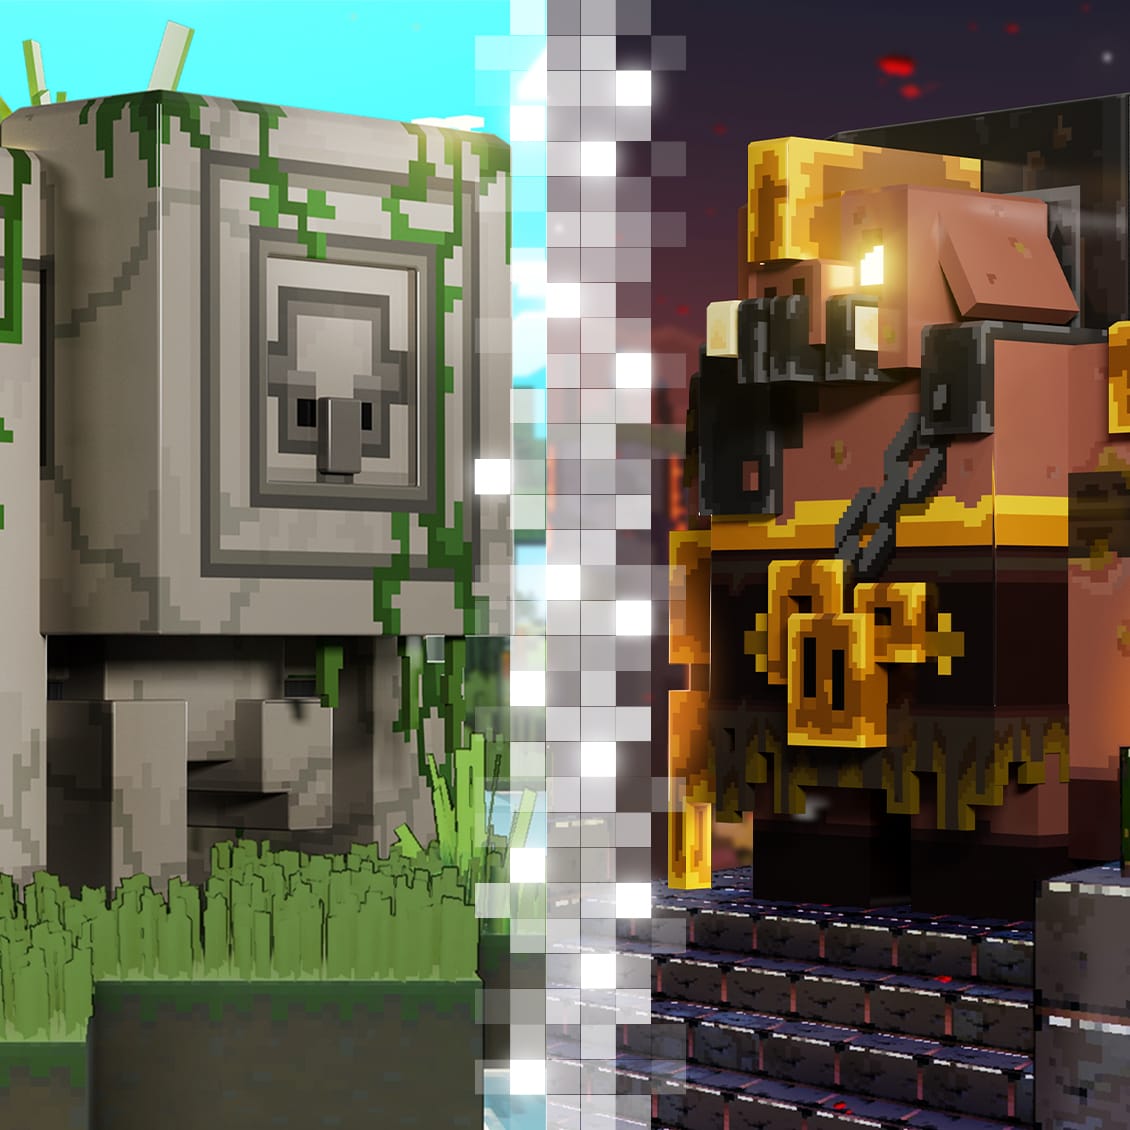 The two custom PC builds standing side by side, one inspired by the First of Stone, one inspired by the Unbreakable piglin boss